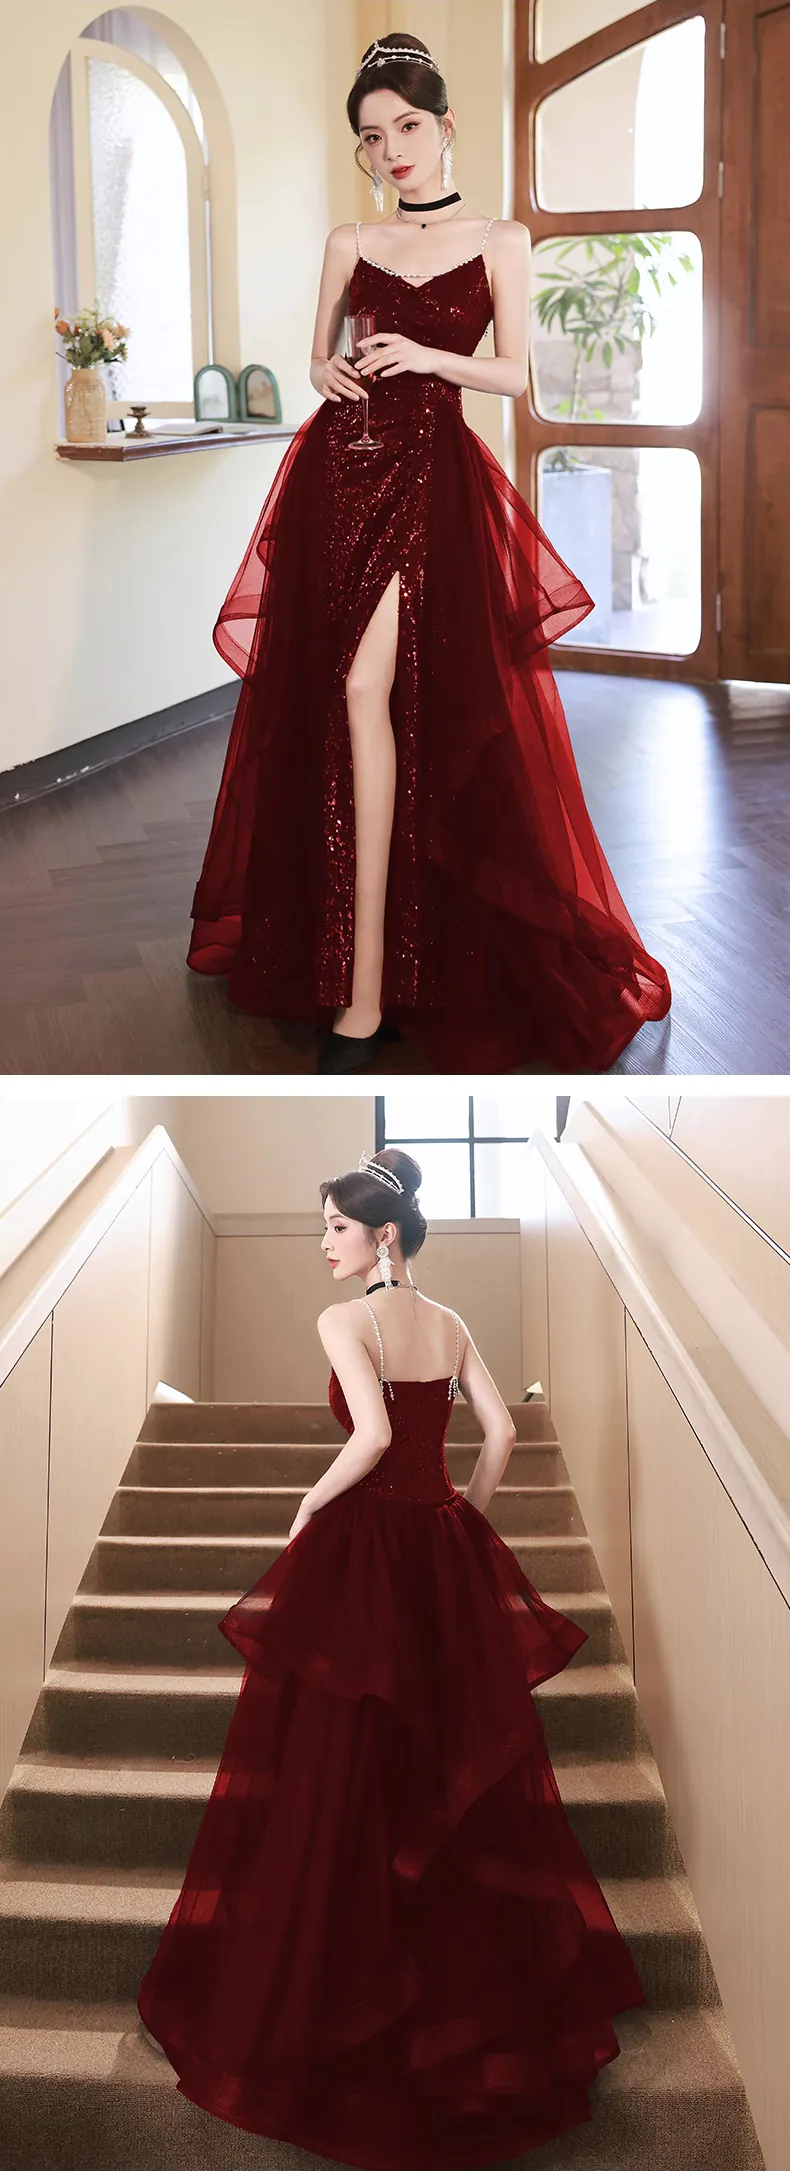 Sexy-Wine-Red-Sleeveless-Split-Formal-Cocktail-Slip-Dress-Evening-Gown13